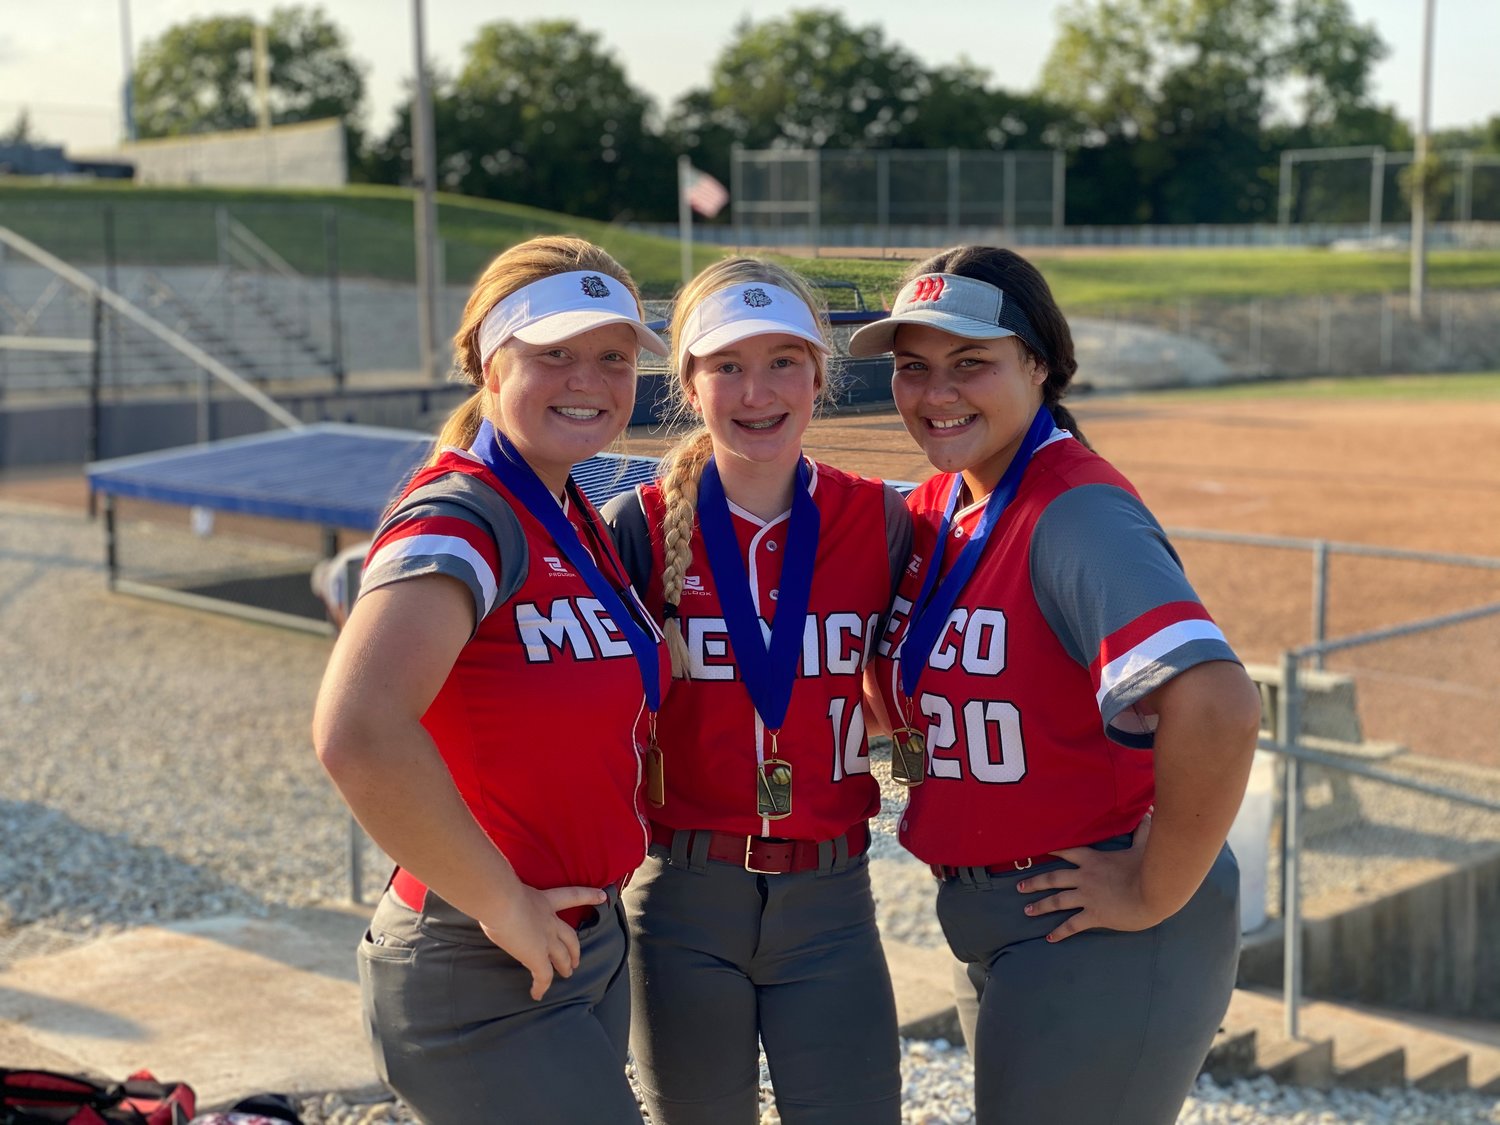 Pictured above are members of the Mexico softball team who were named to the War on the Battlefield all-tournament team. Pictured, from left, are Abby Bellamy, Lexi Willer and Eboni Mayfield. The trio are all sophomores. [Kris Bellamy photo]